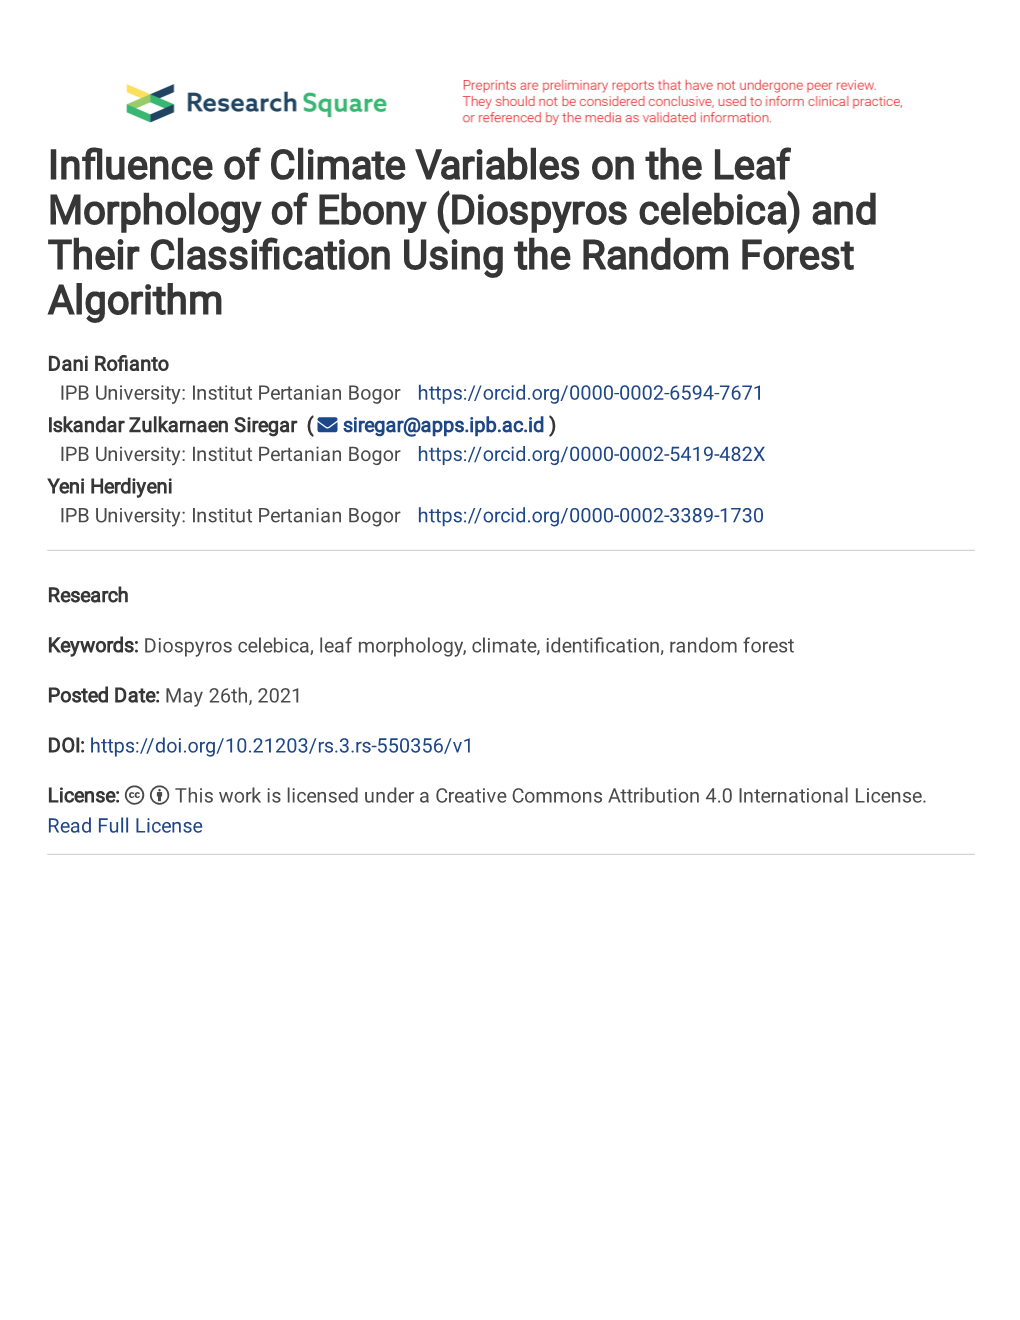 Influence of Climate Variables on the Leaf Morphology of Ebony (Diospyros Celebica) and Their Classification Using the Random Forest Algorithm